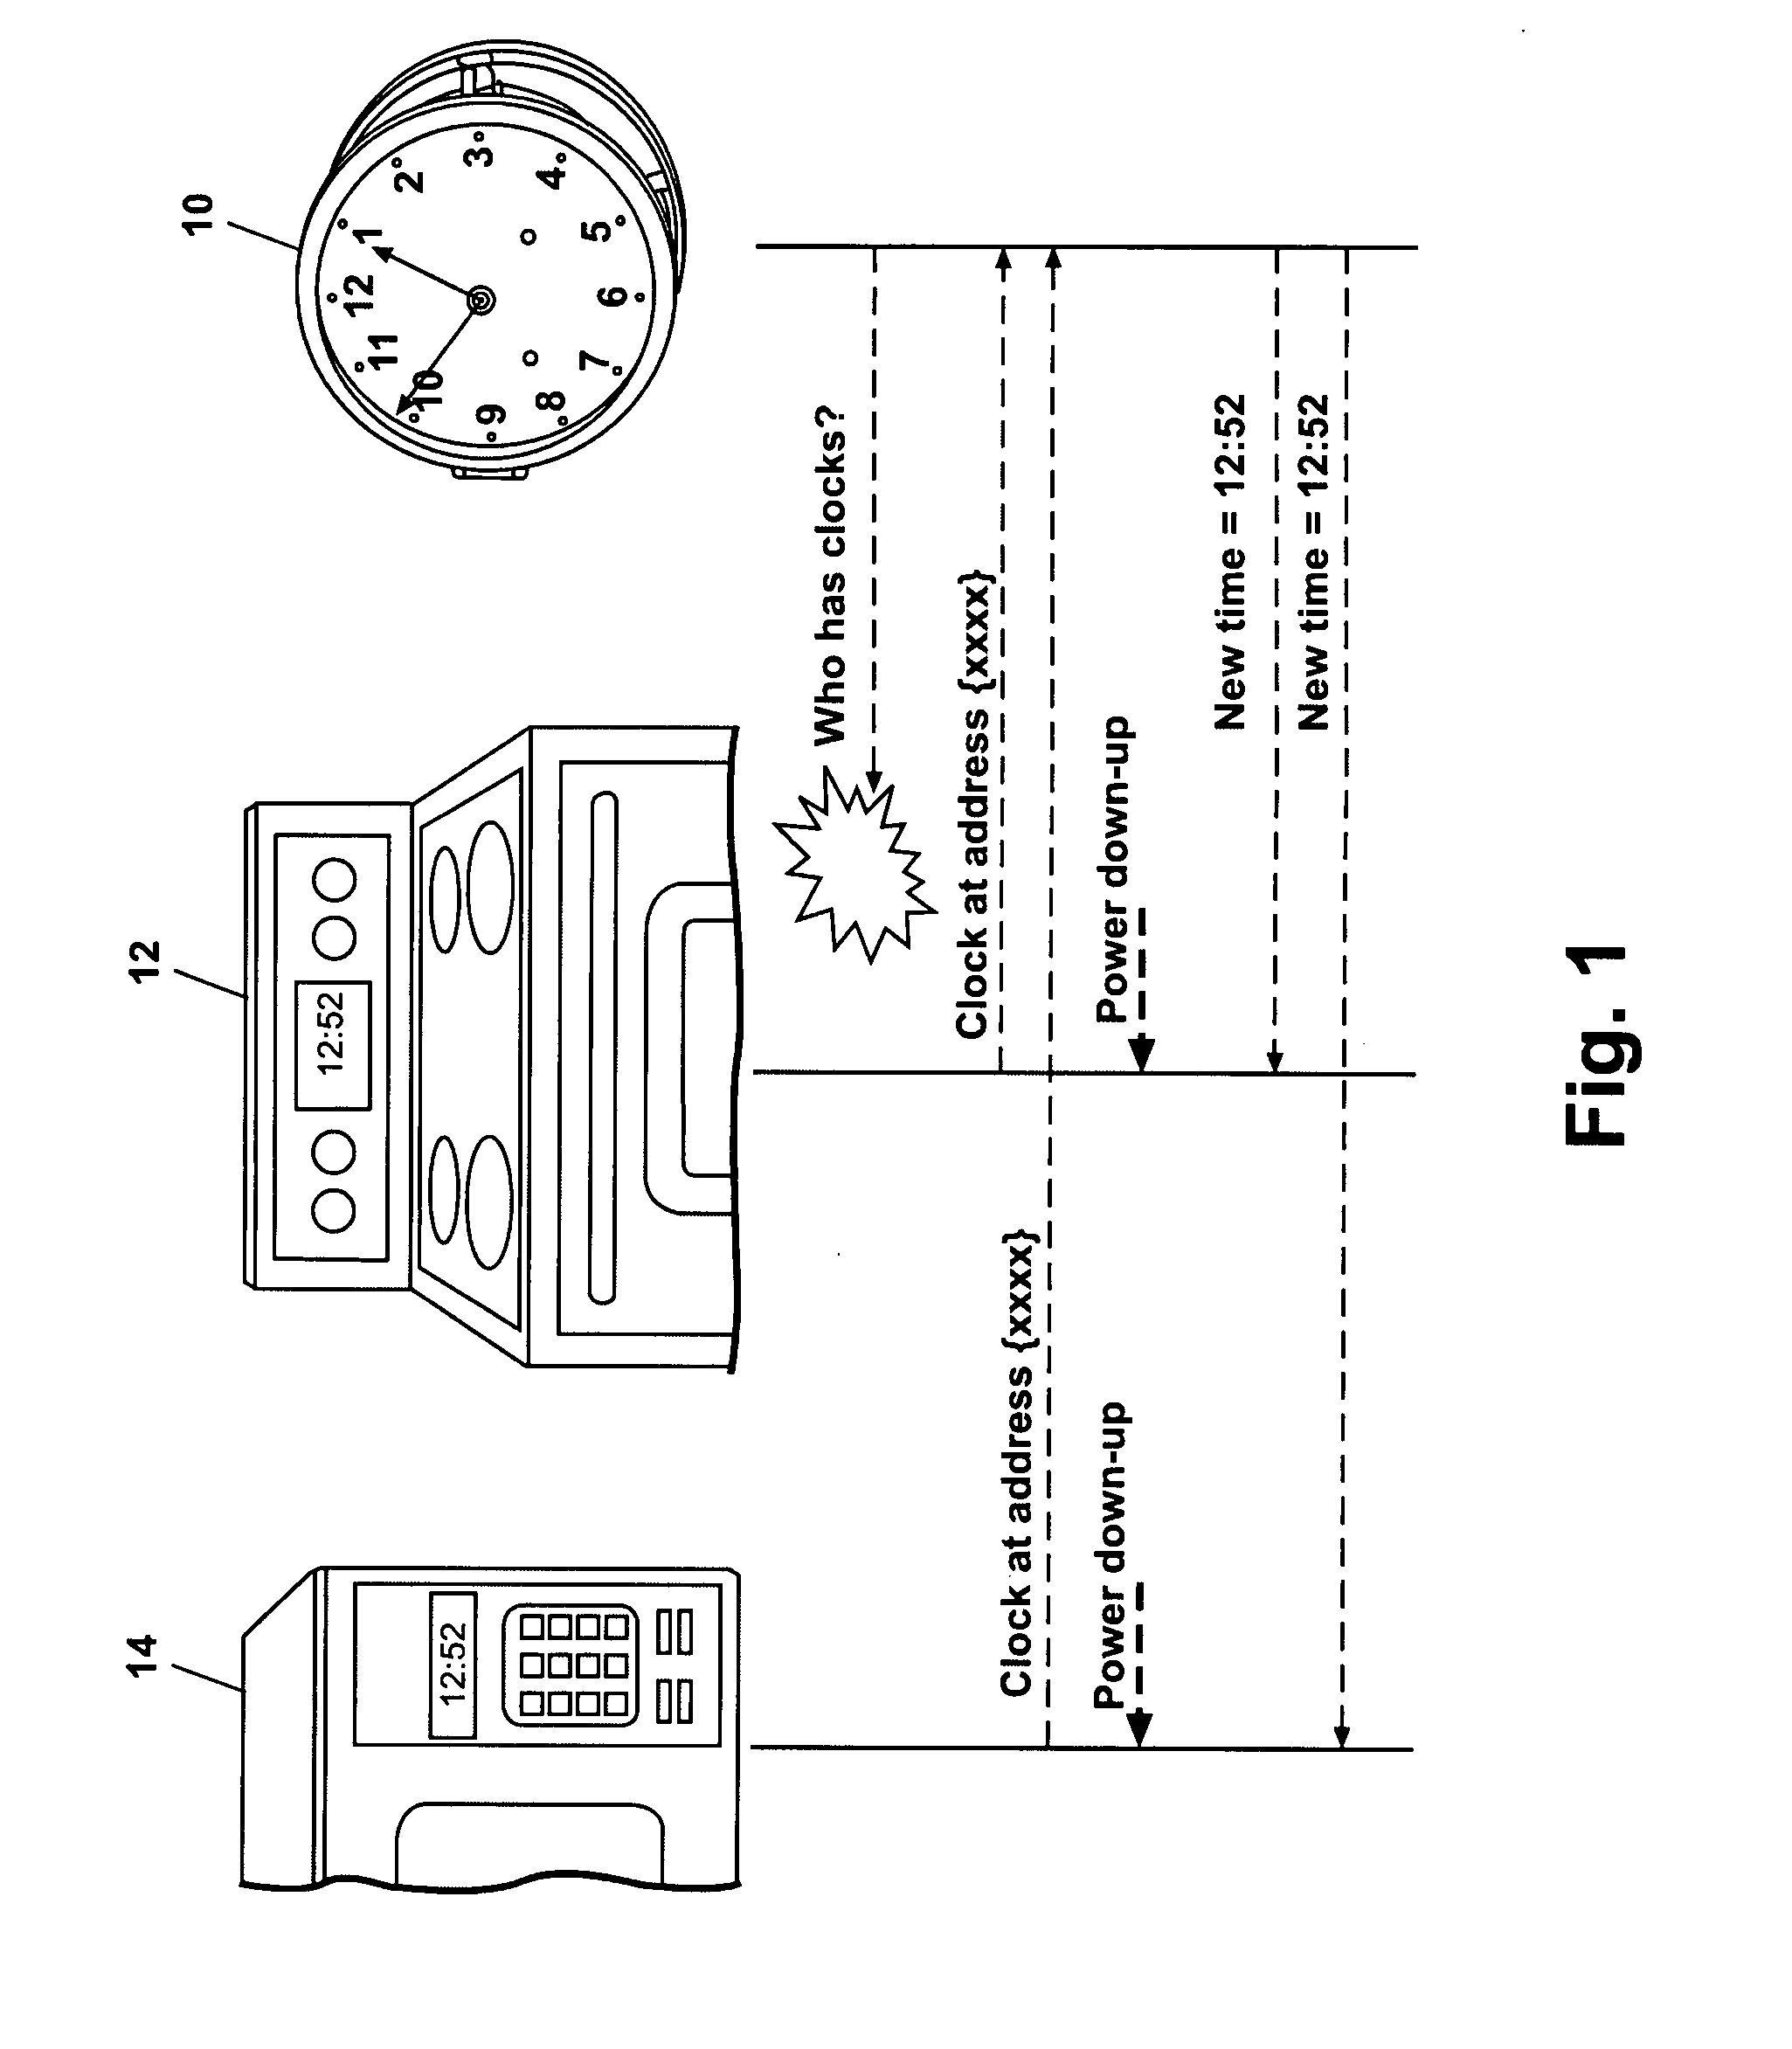 Smart coupling device